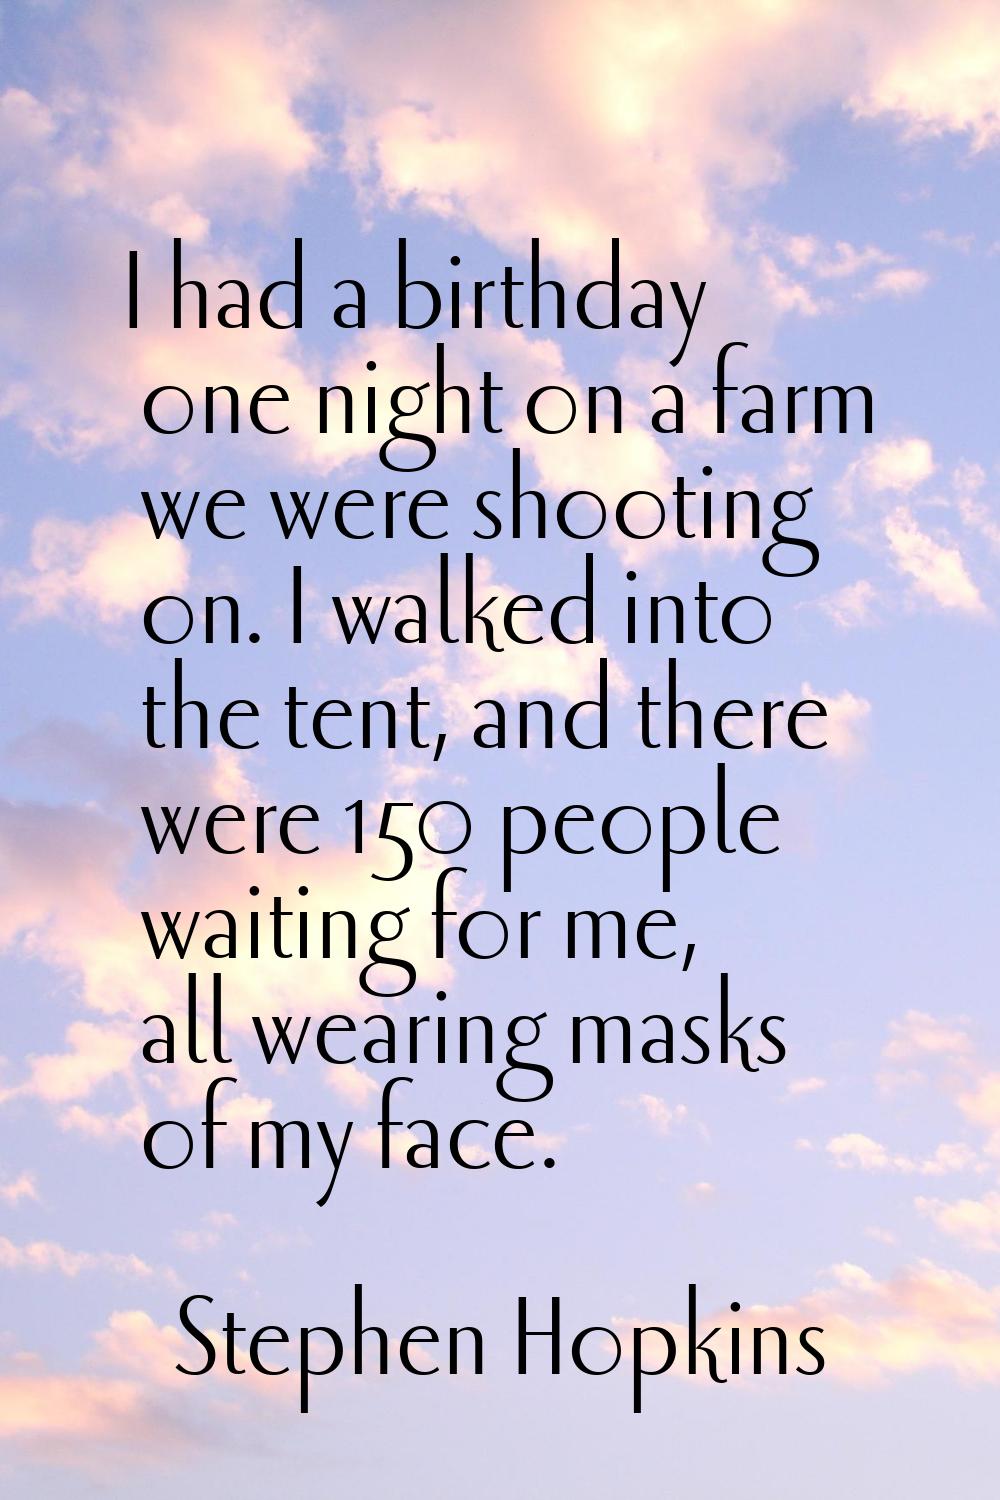 I had a birthday one night on a farm we were shooting on. I walked into the tent, and there were 15